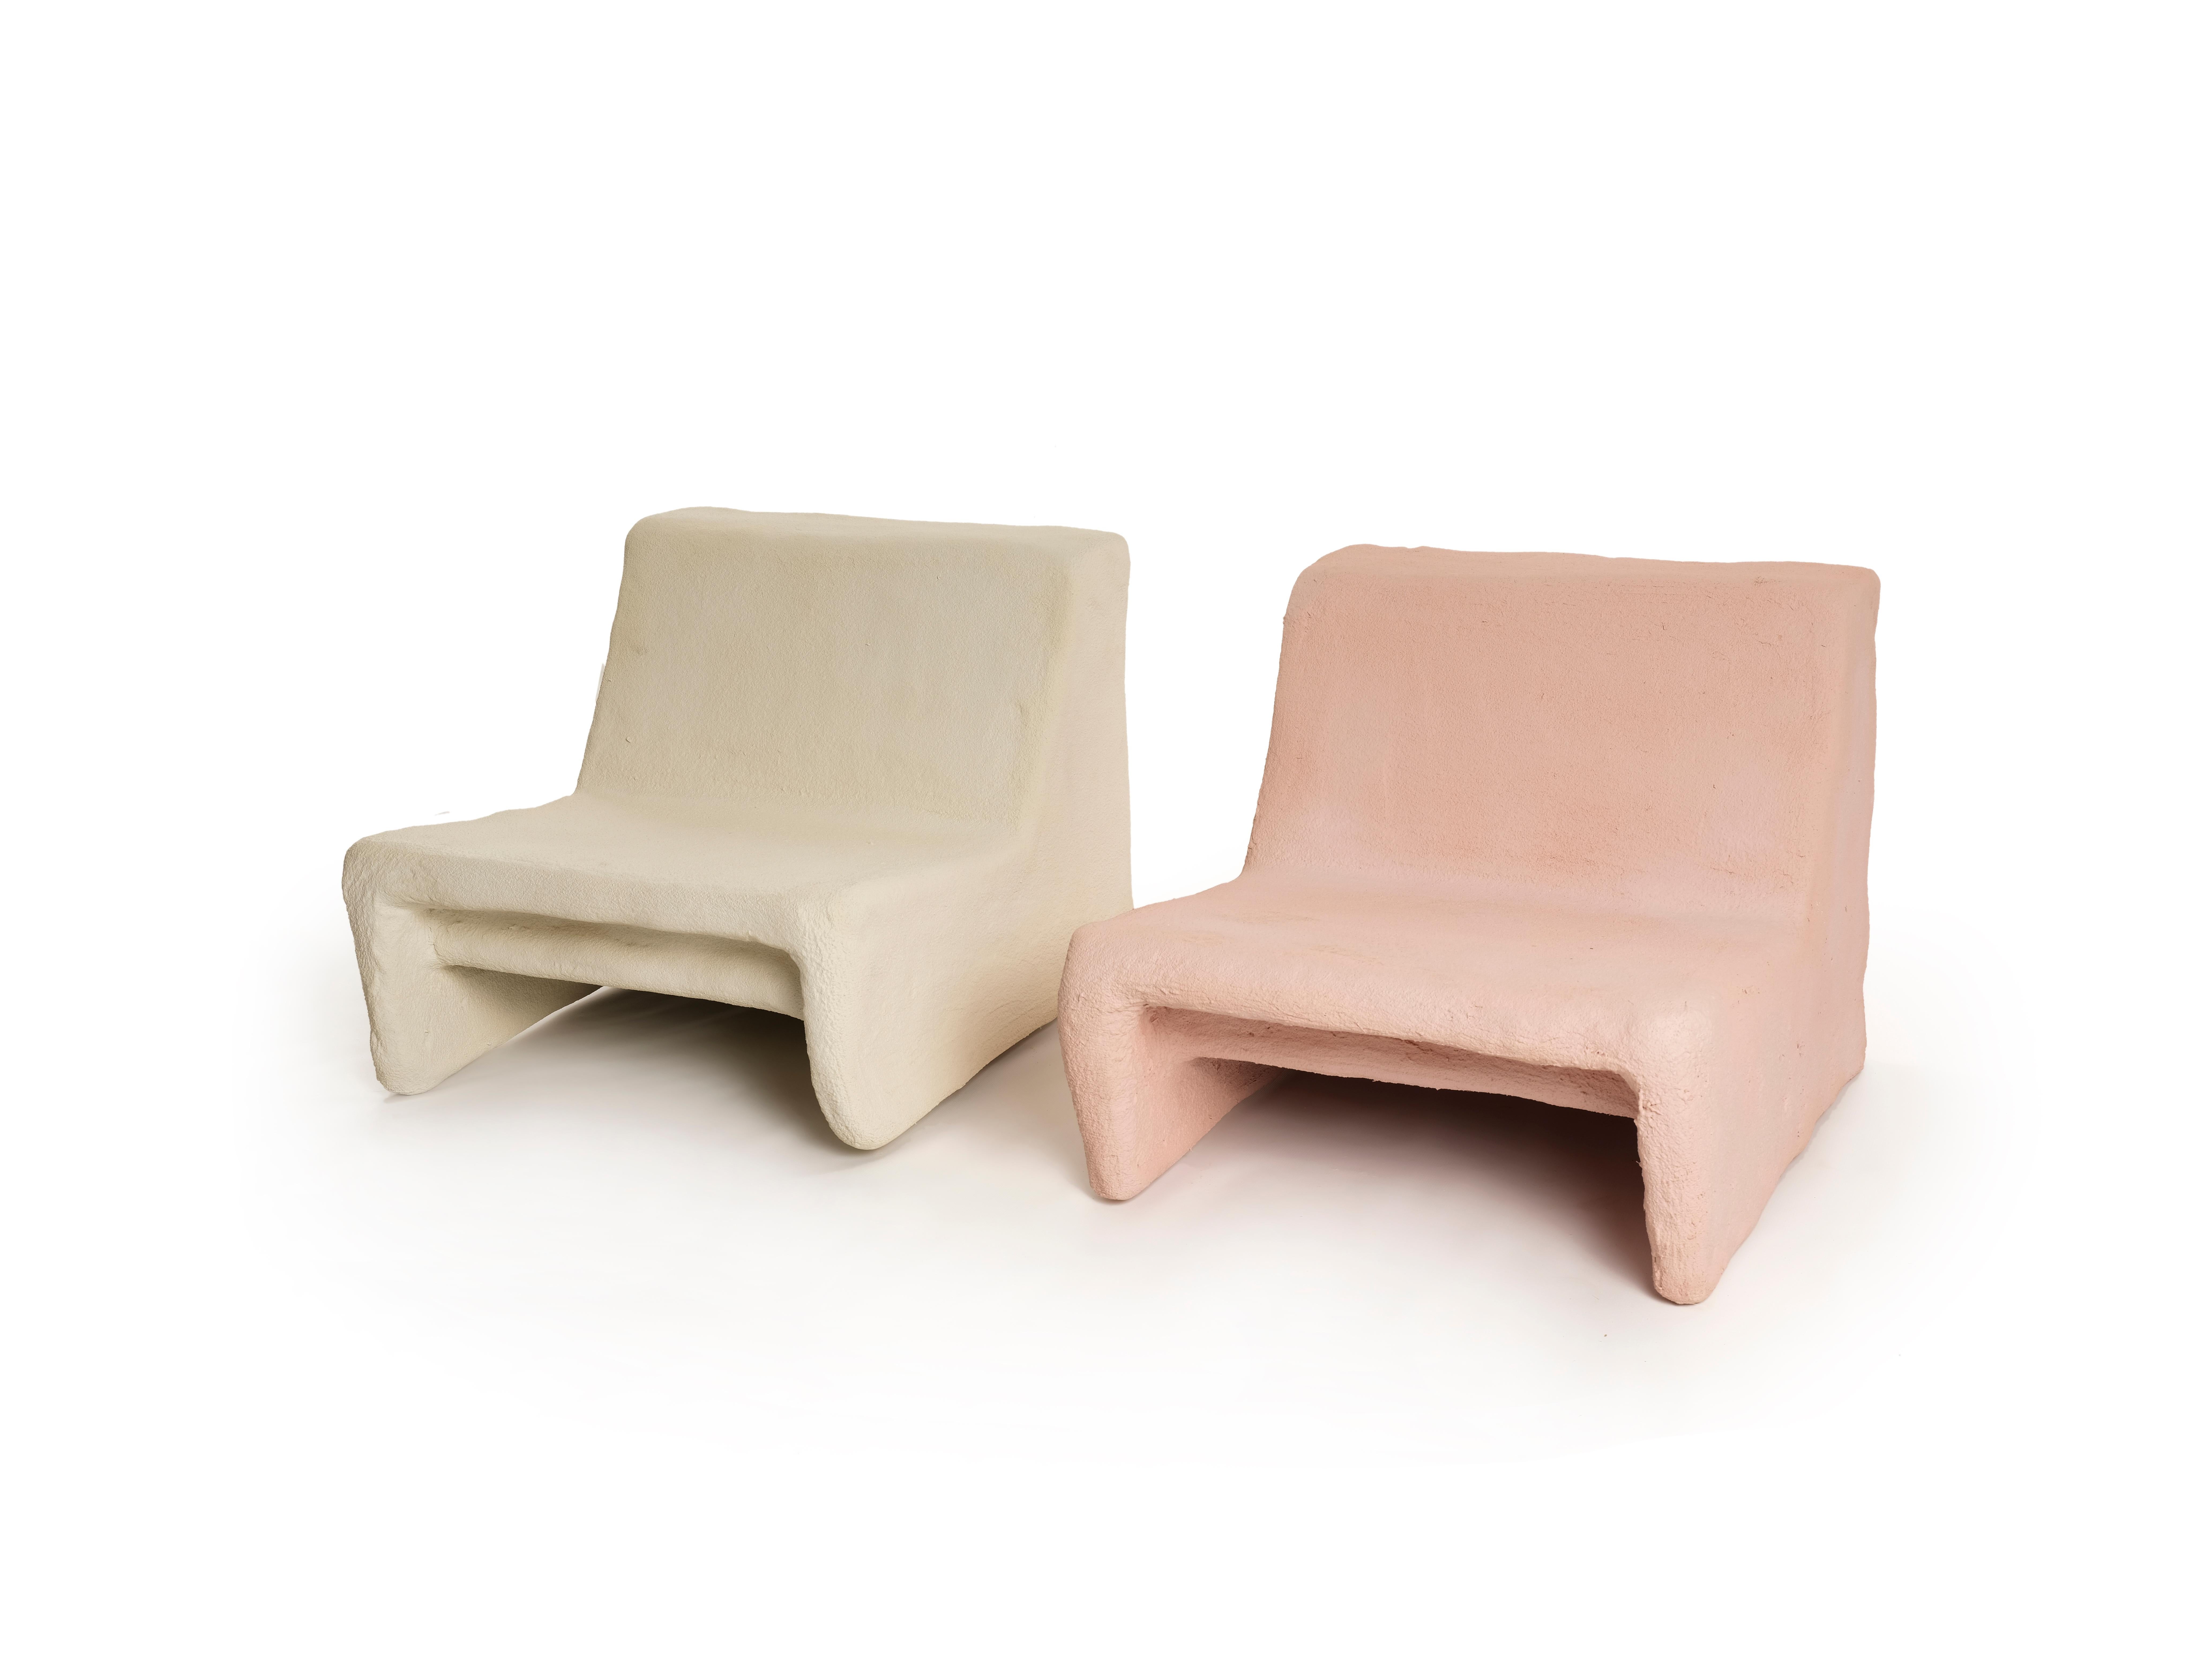 Daisy chair by Mary-Lynn & Carlo, 2021
The Elephant Project
Dimensions: H 60 x W 69 x D 81 cm
Materials: concrete colored, foam polystyrene
Finish: water, stains repellent

Marylynn and Carlo:

The Massoud siblings have been experimenting